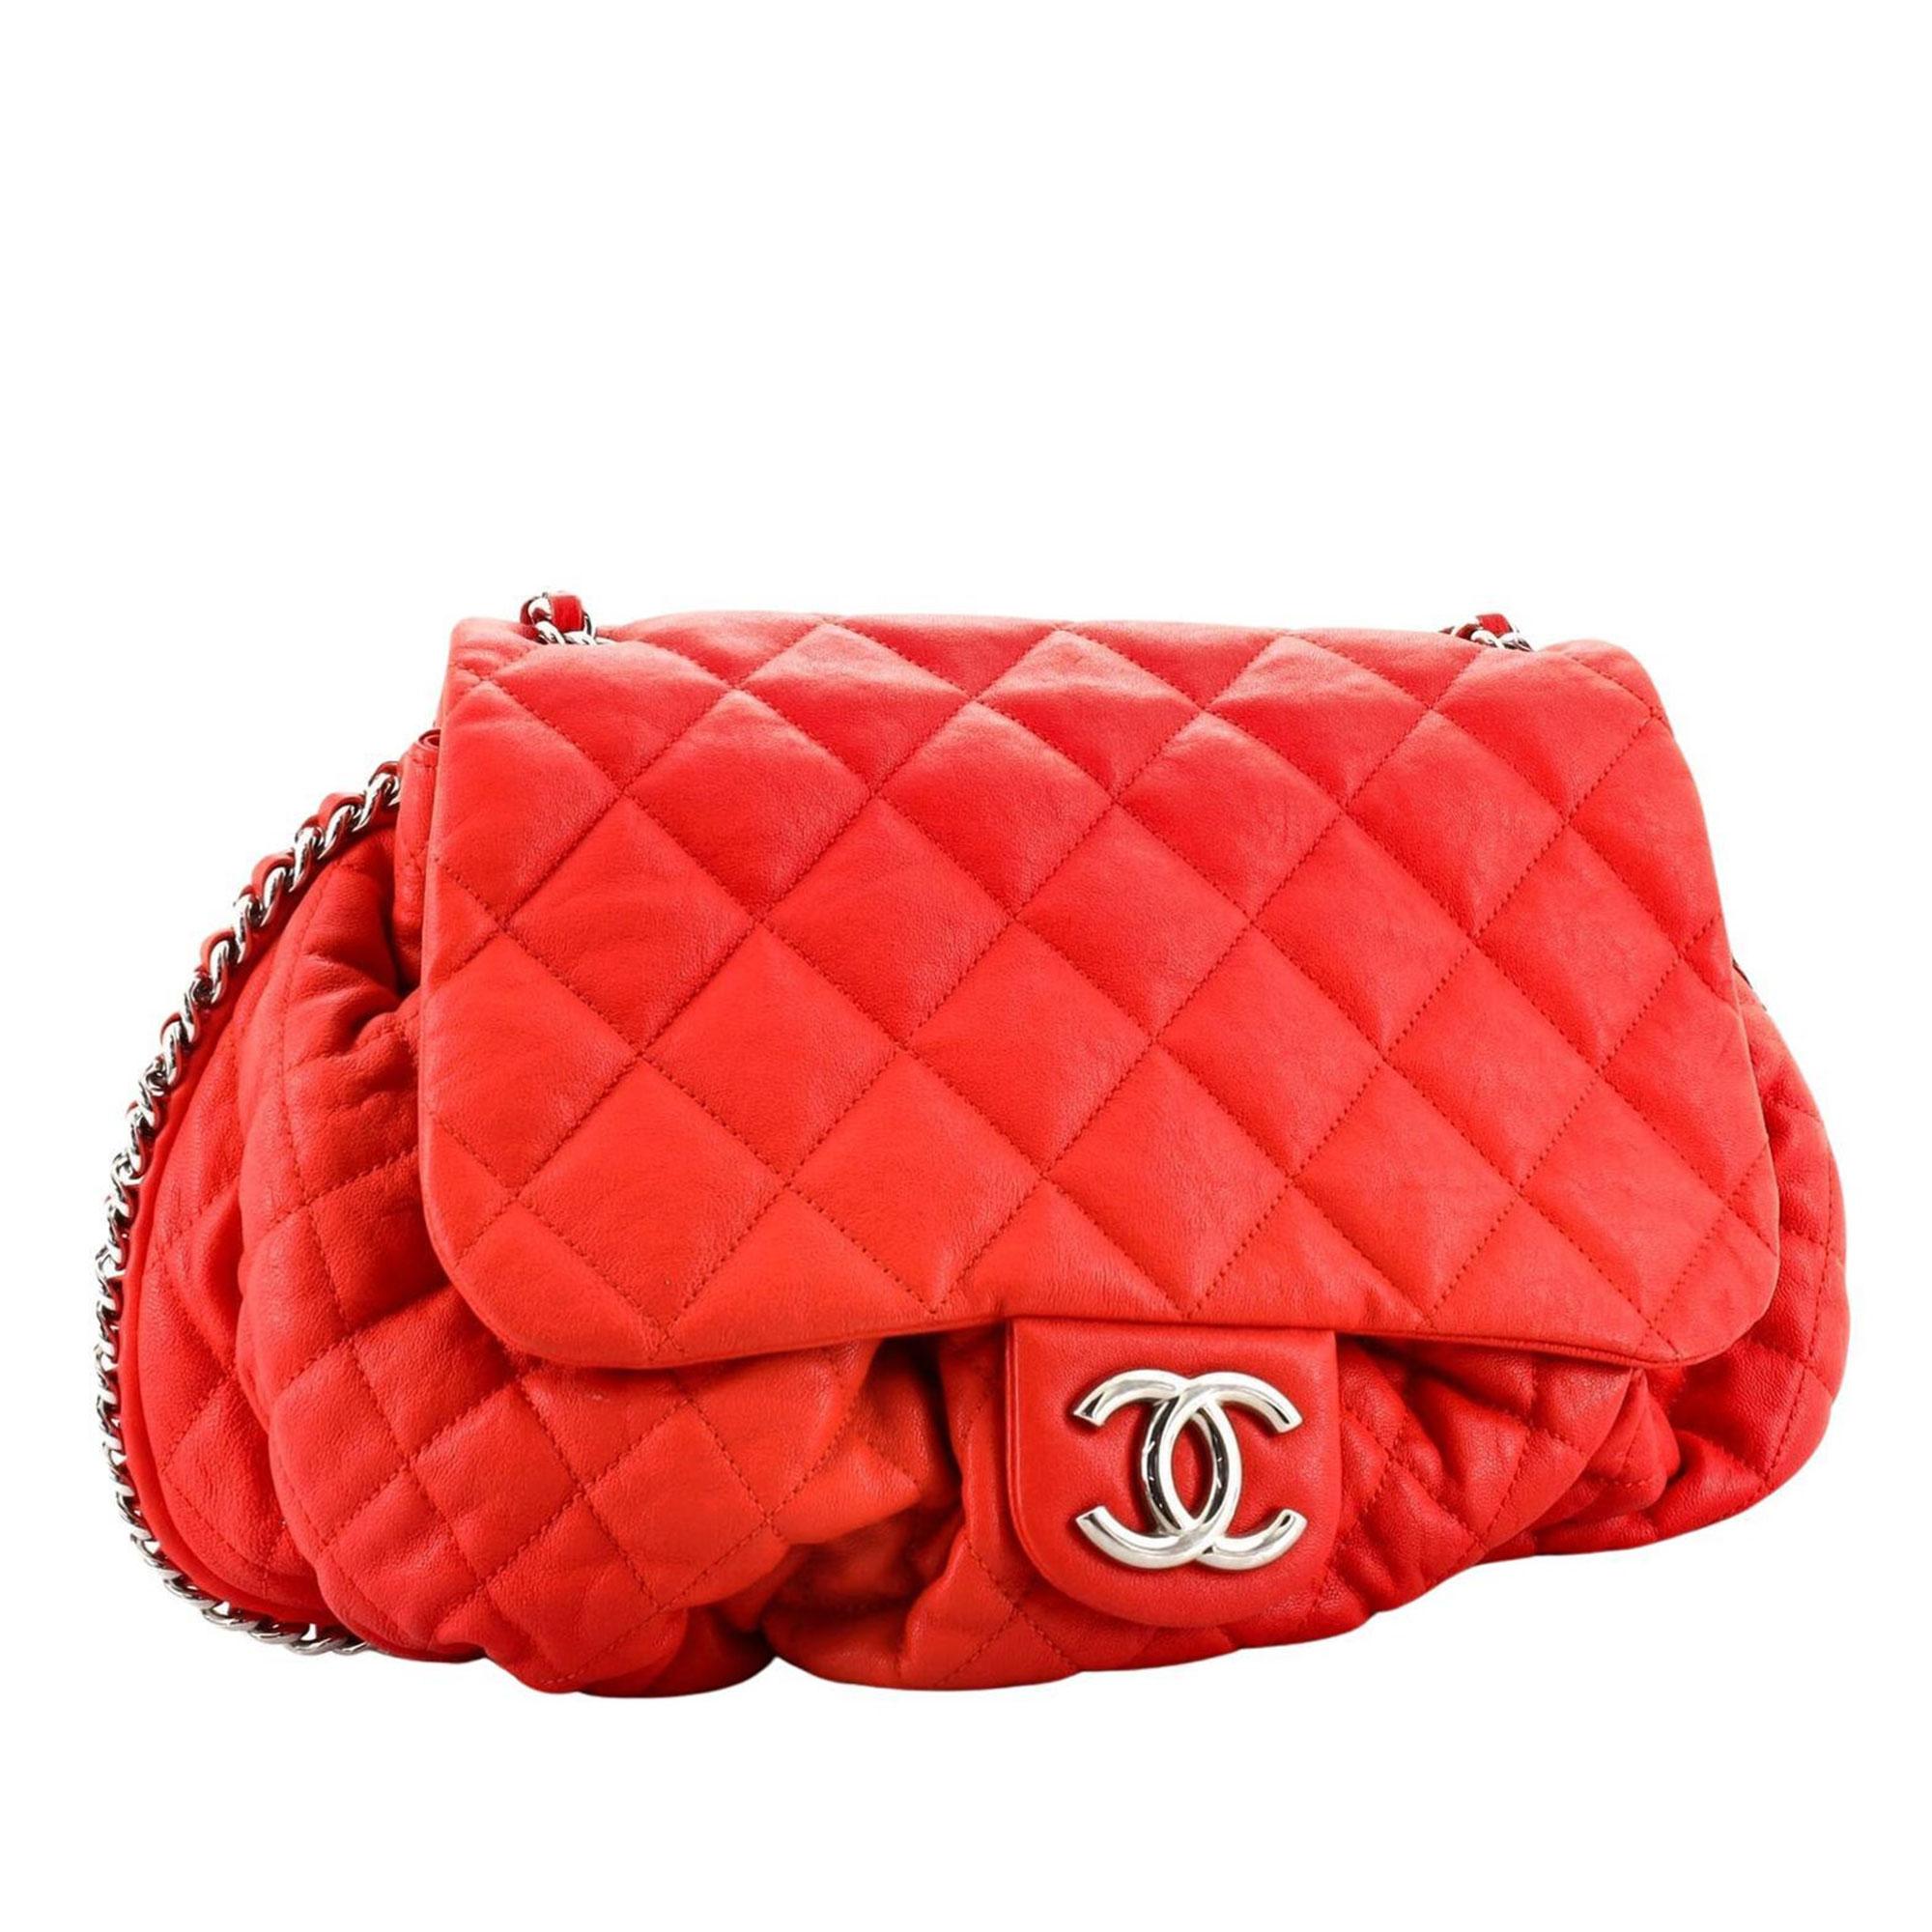 Chanel Large Chain Around Limited Edition Pristine Red Calfskin Leather Flap Bag In Good Condition For Sale In Miami, FL